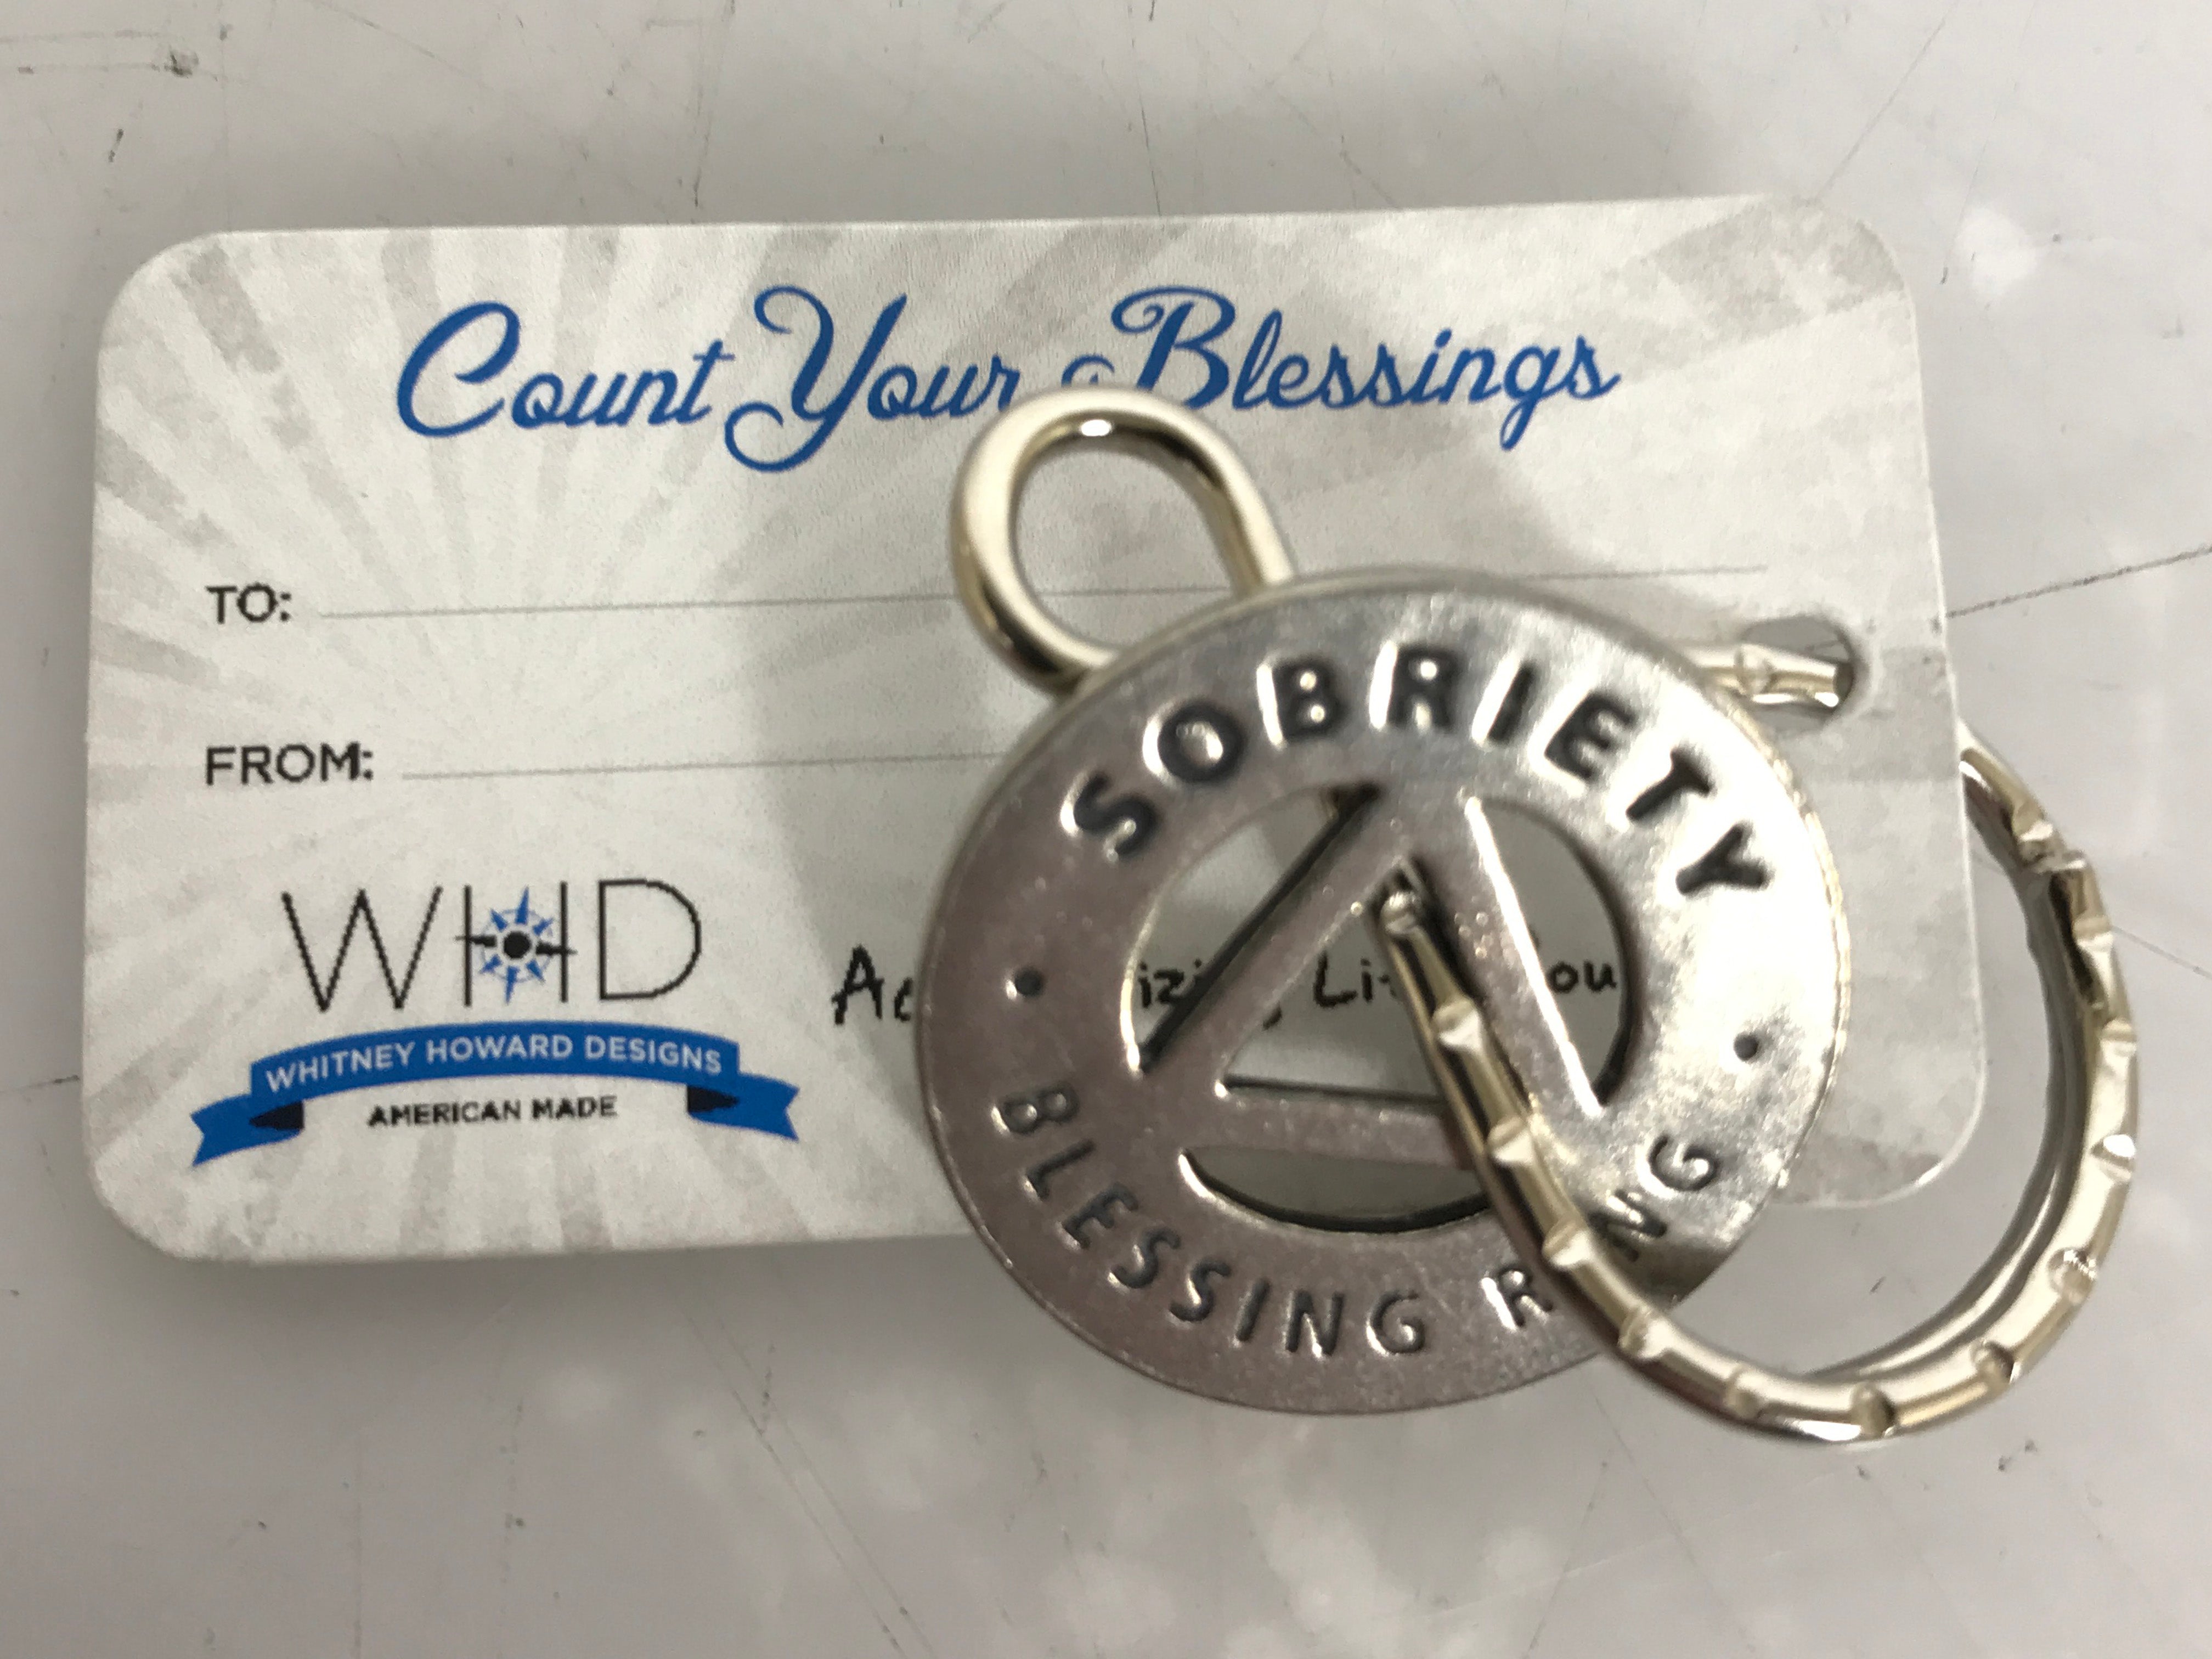 WHD BlessingRings "Sobriety" Keychain